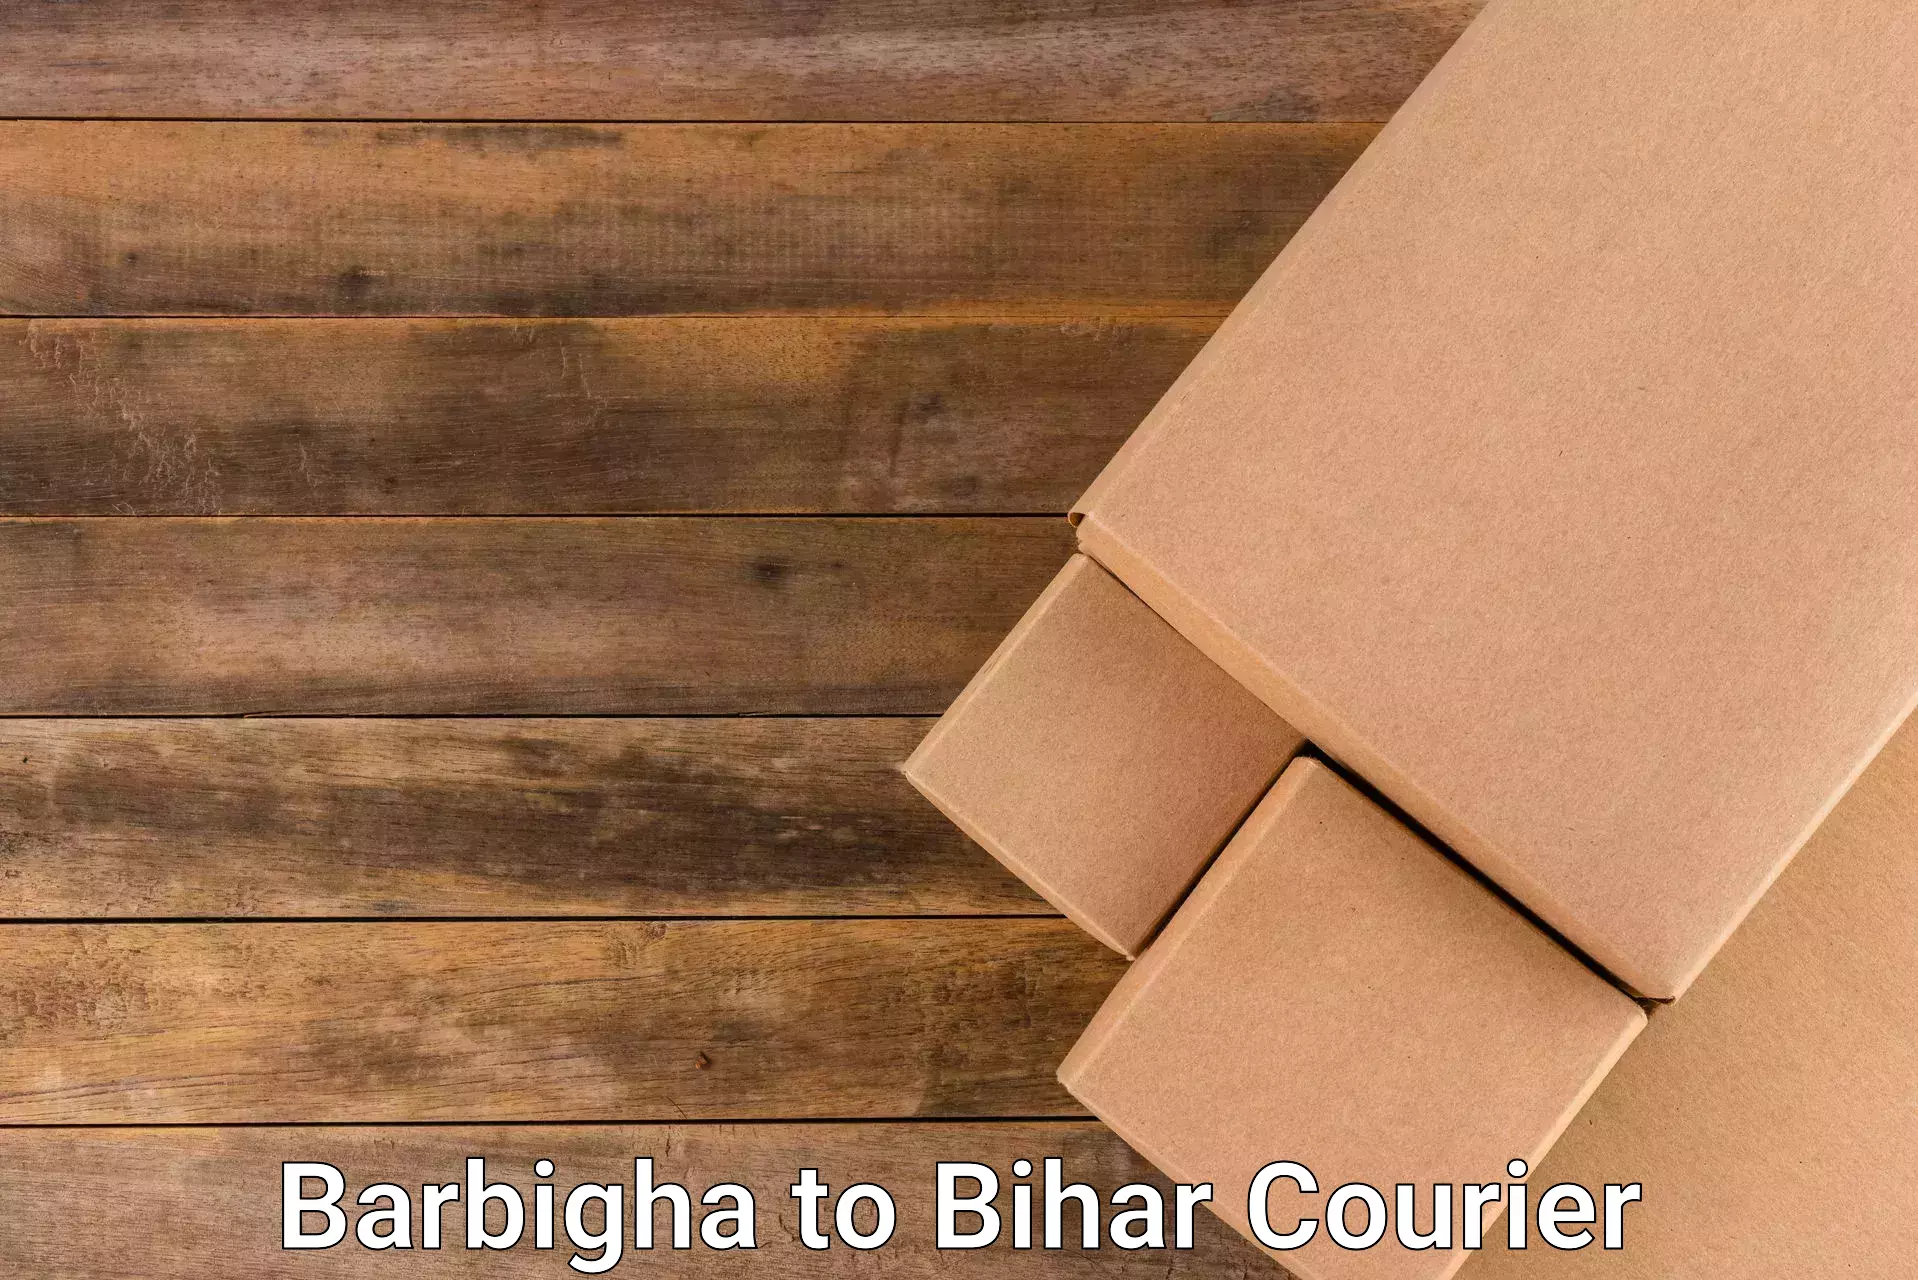 Cargo delivery service in Barbigha to Bihar